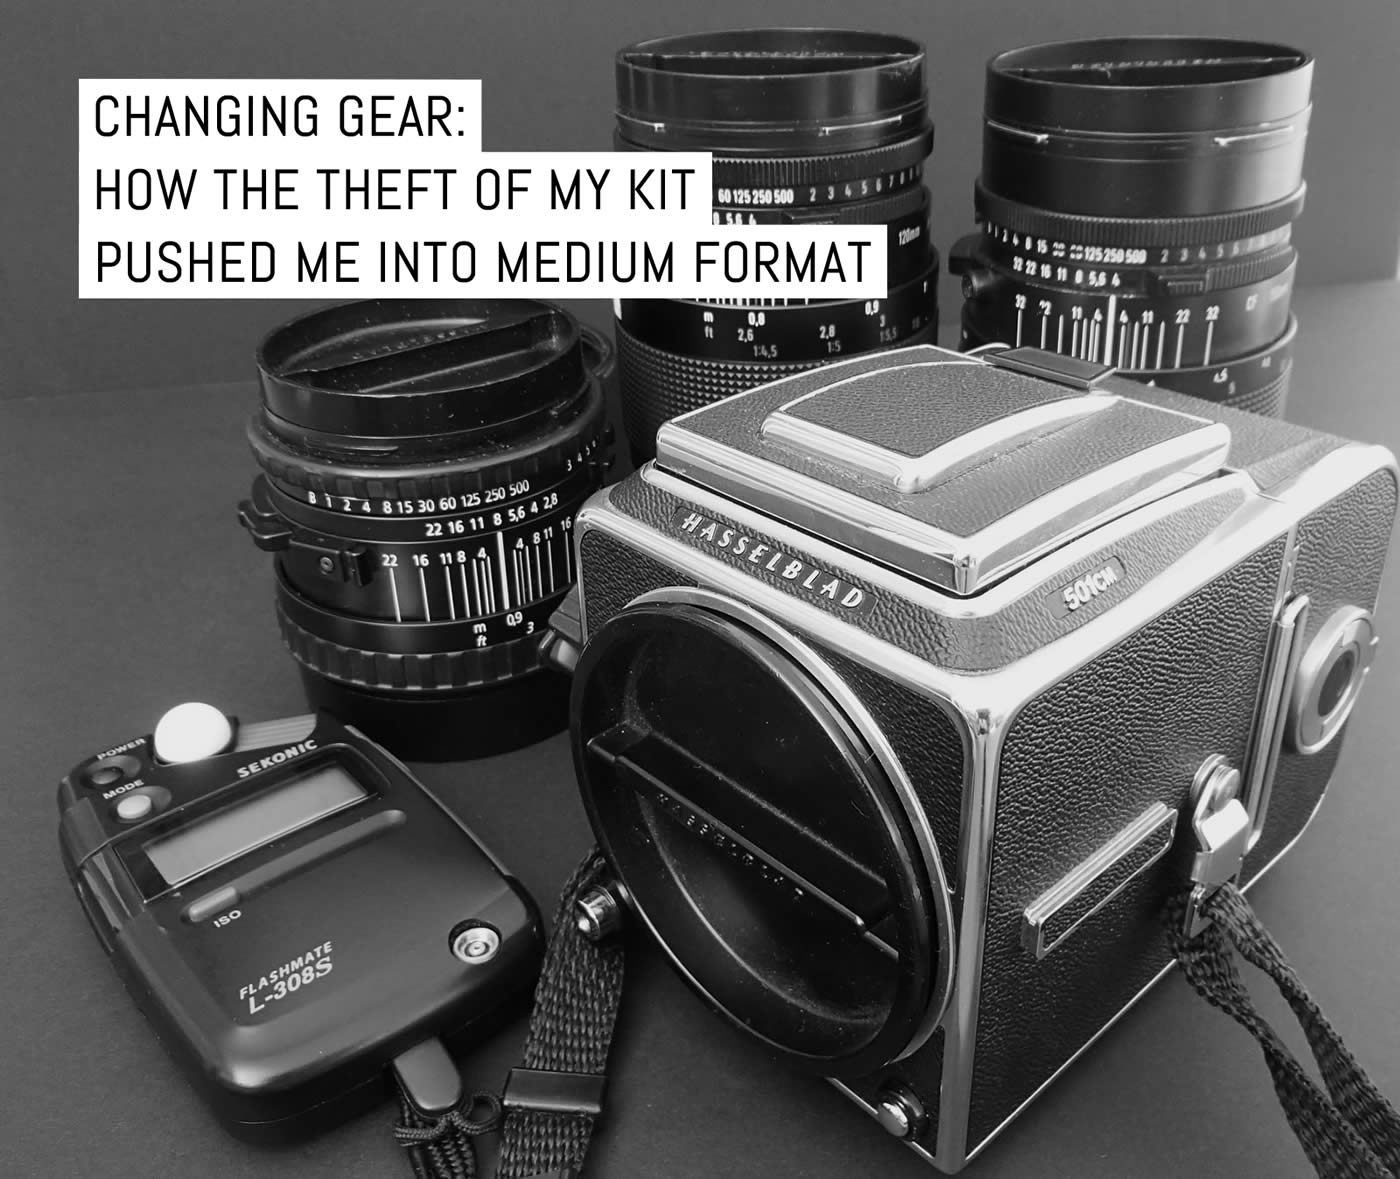 Changing gear: how the theft of my kit pushed me into medium format